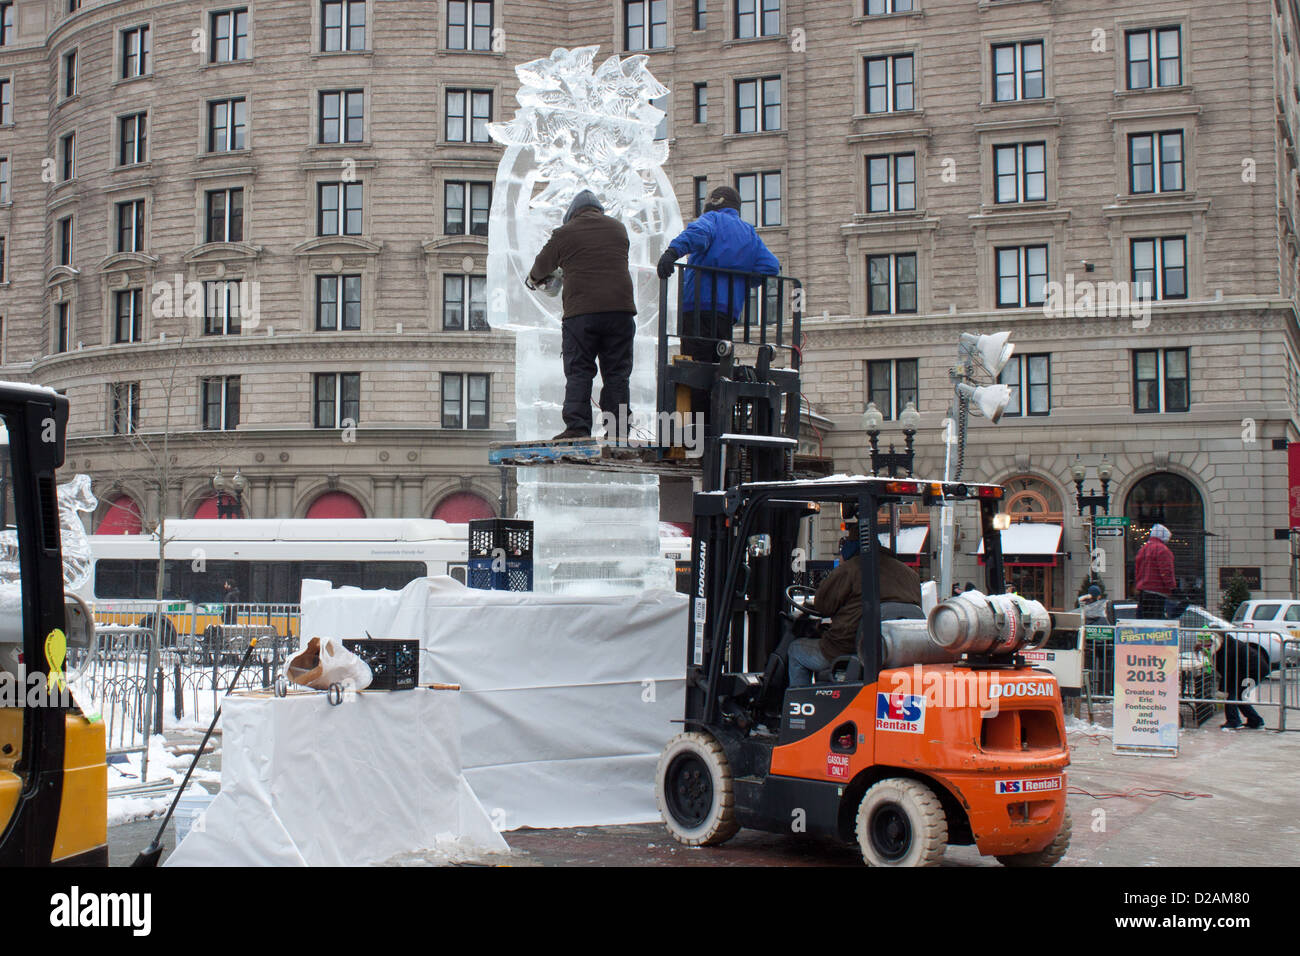 Ice Sculpture, Copley Square, New Years Eve, Boston 2012 Stock Photo